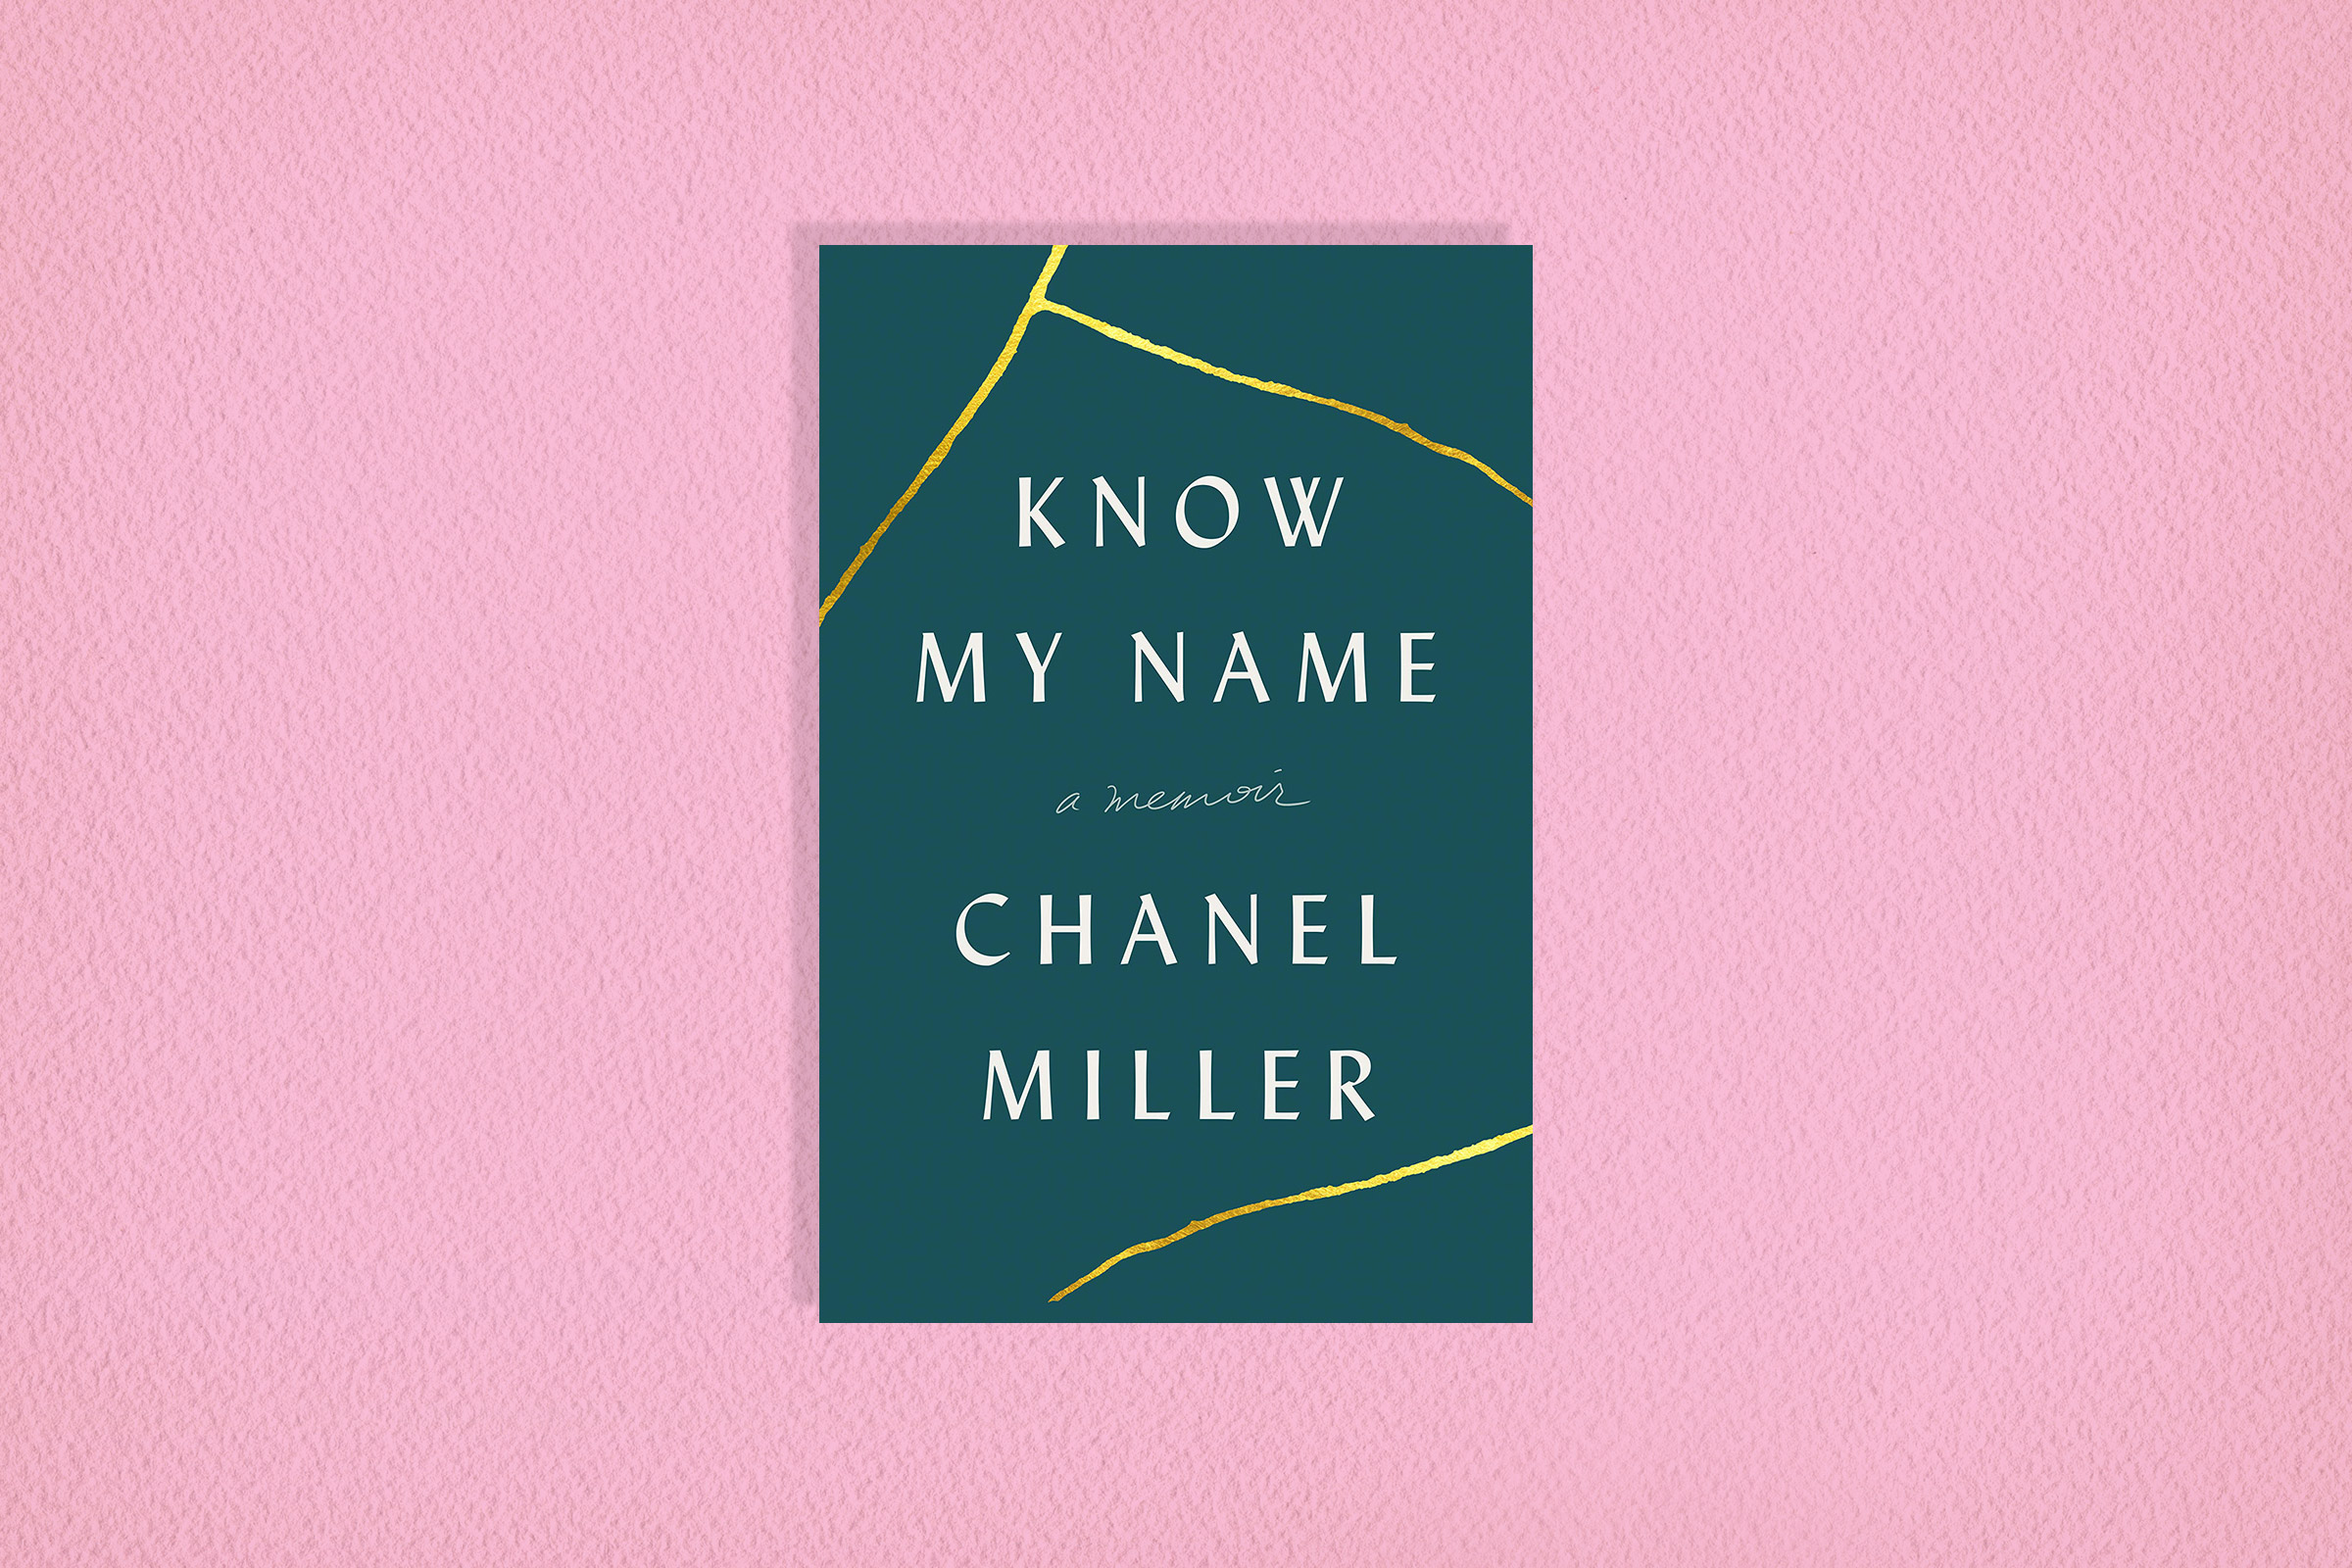 We Should All Know Her Name A Book Review on Chanel Millers Memoir   archive